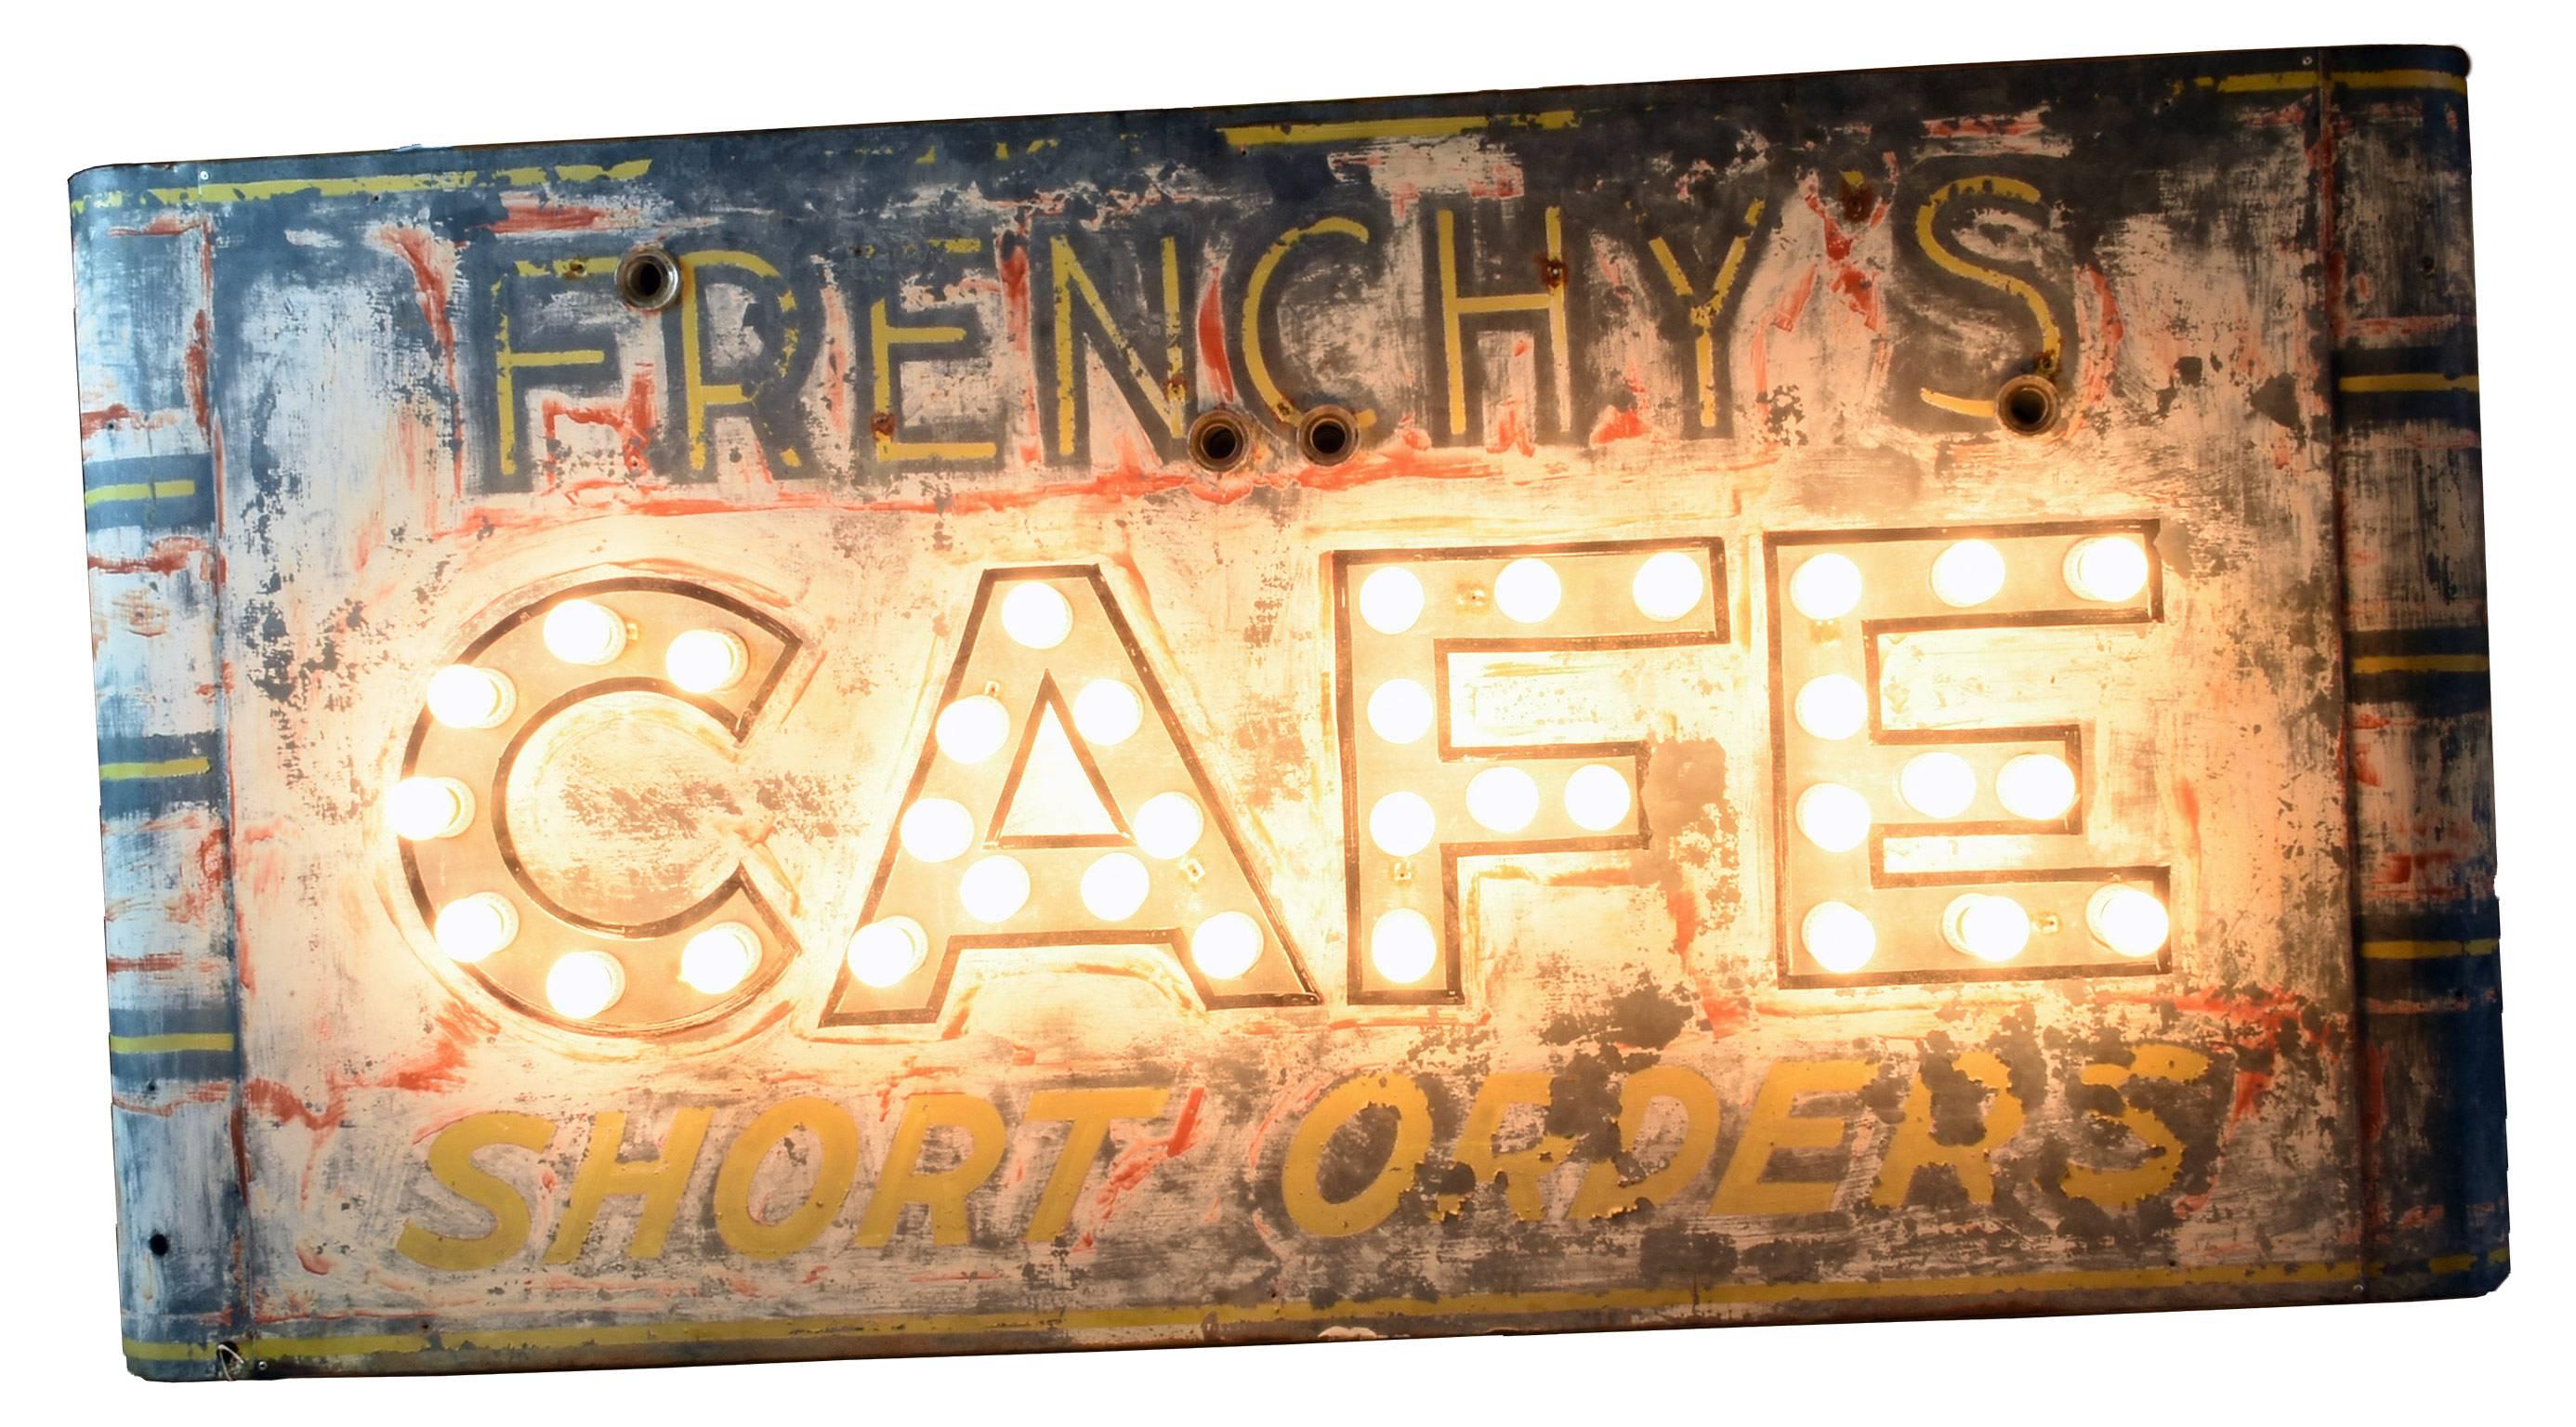 This sign, circa 1930s features a wonderful patina of old Classic colors on a steel base. This café sign recollects the graphic advertising of the mid-20th century in its use of bold sans serif typography and bright colors. The formerly lit neon